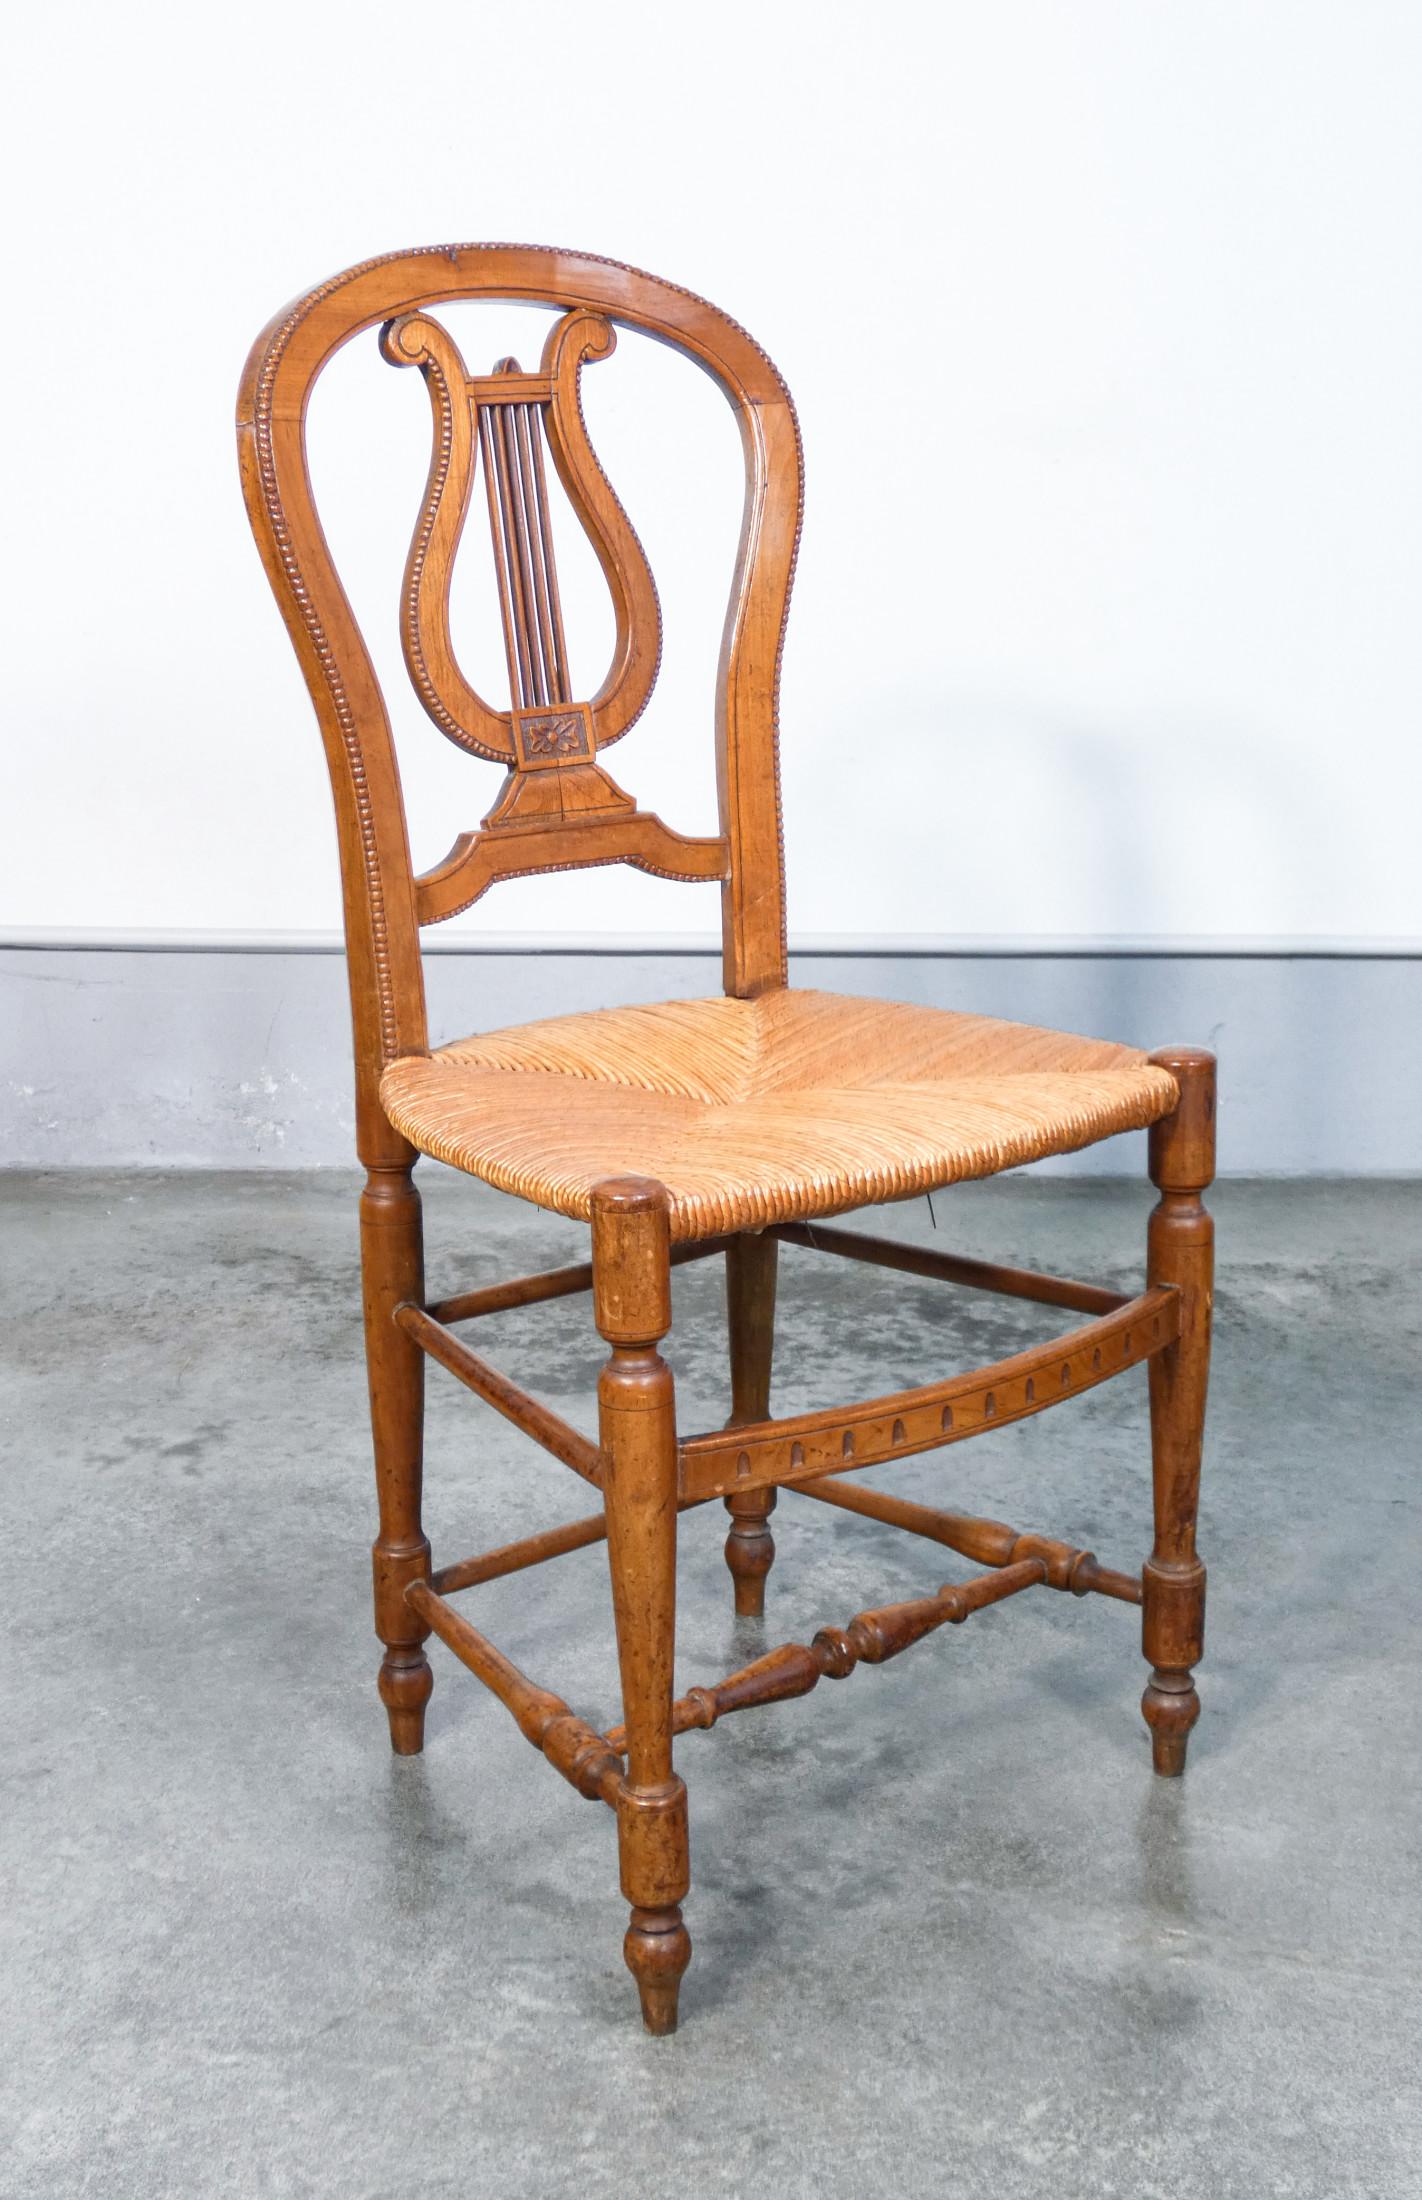 Pair of Cherry Wood Chairs with Lyre-Shaped Back and Straw Seat, Early 20th For Sale 2